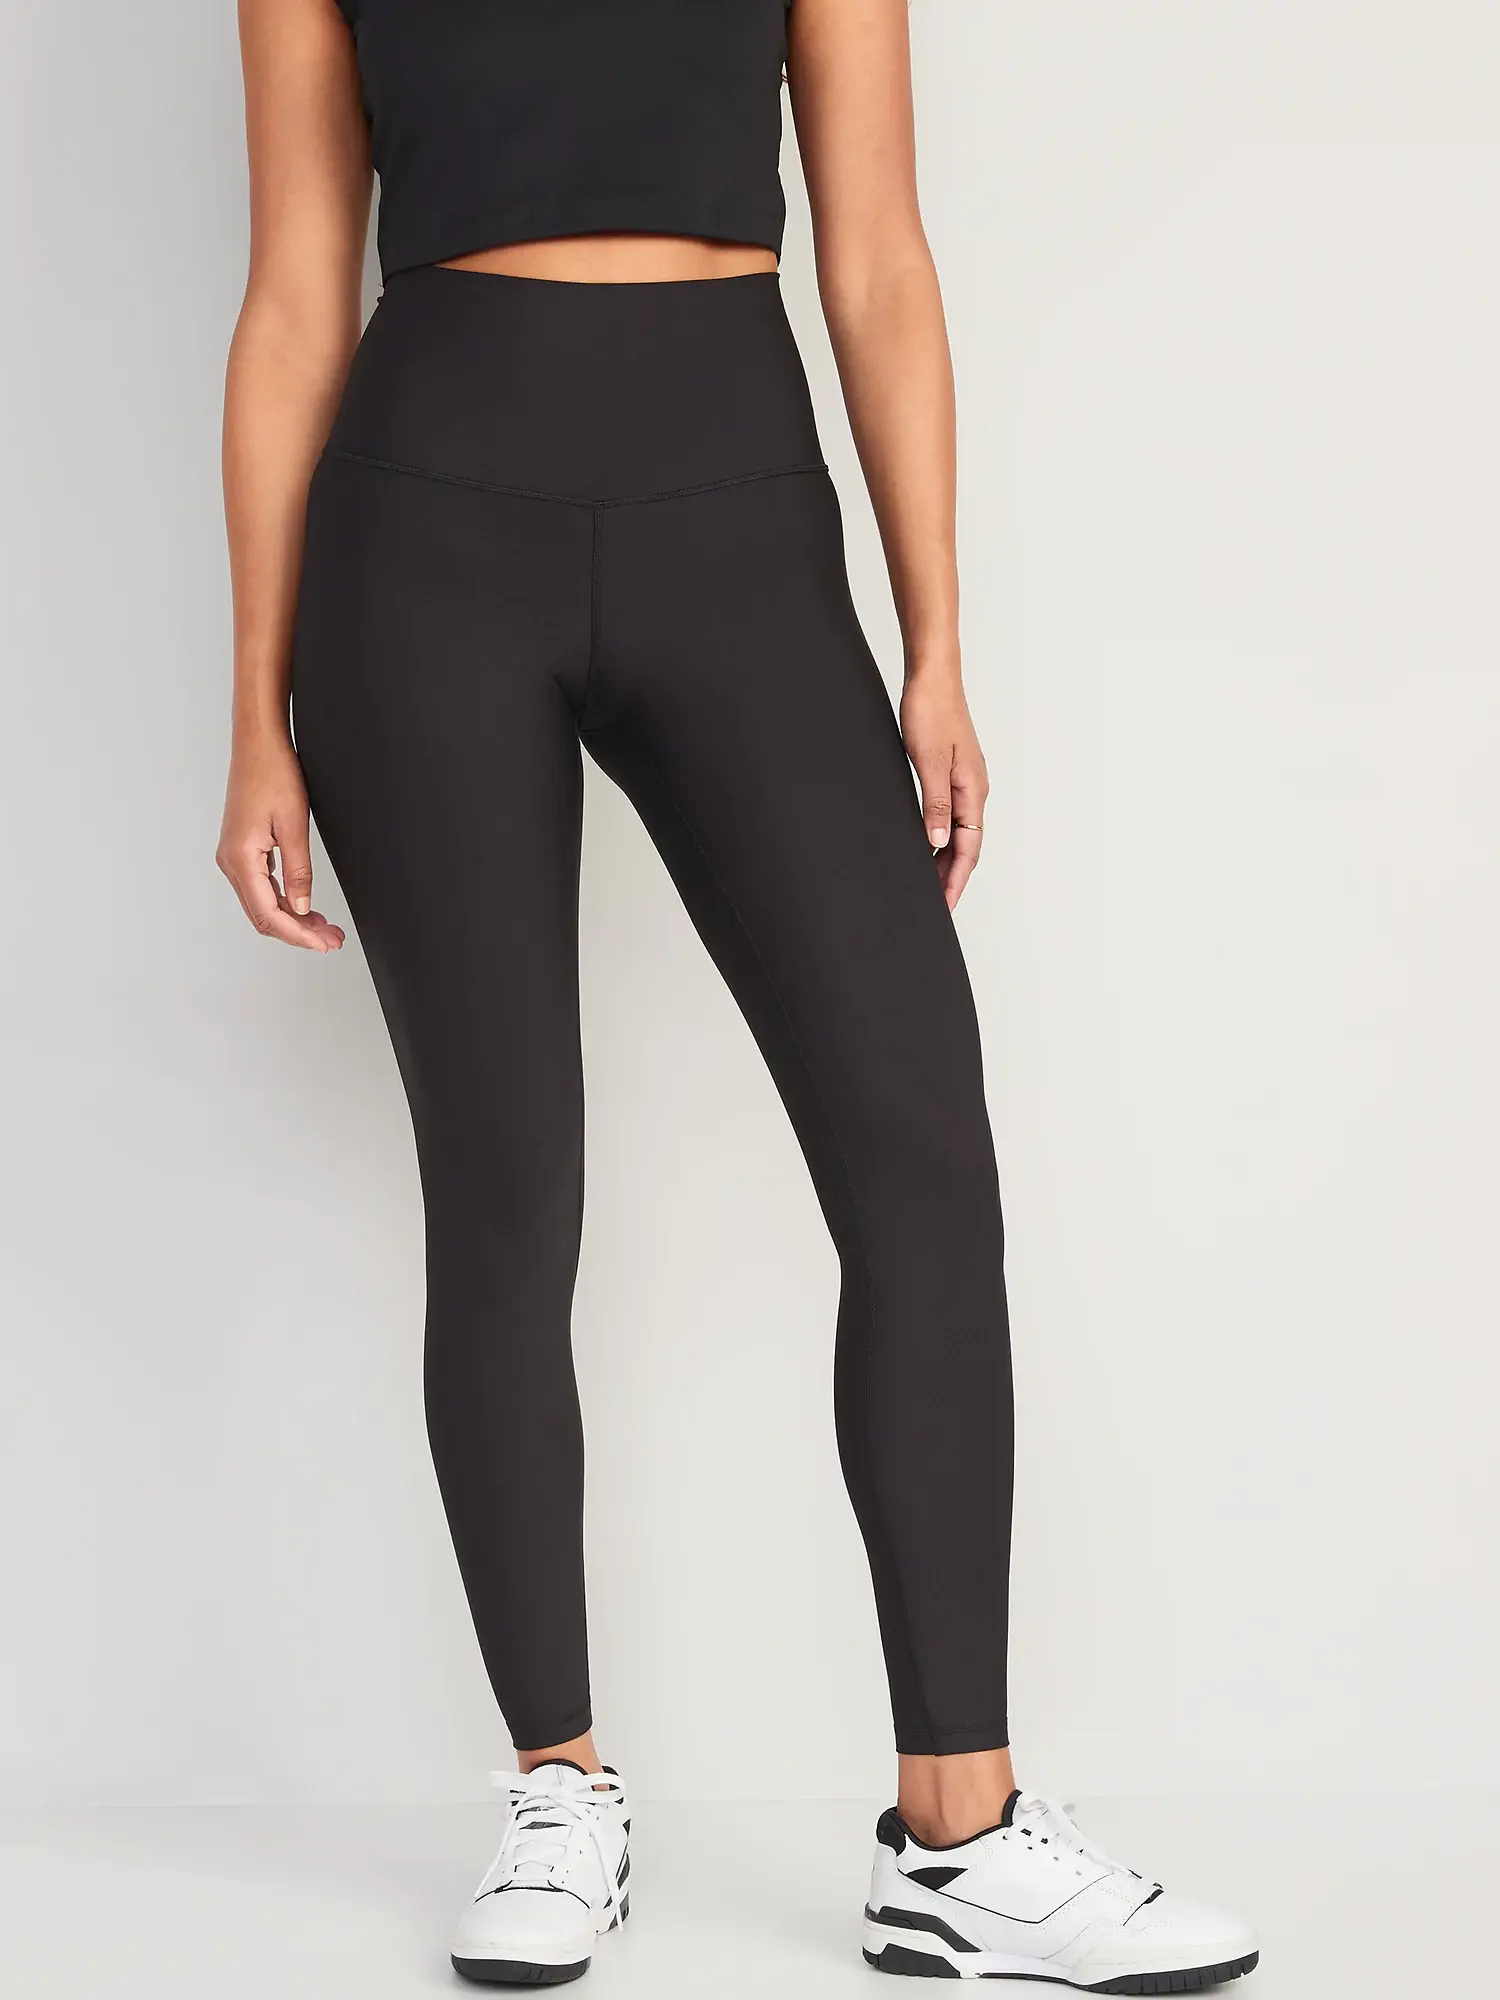 Old Navy Extra High-Waisted PowerSoft Leggings for Women black. 1